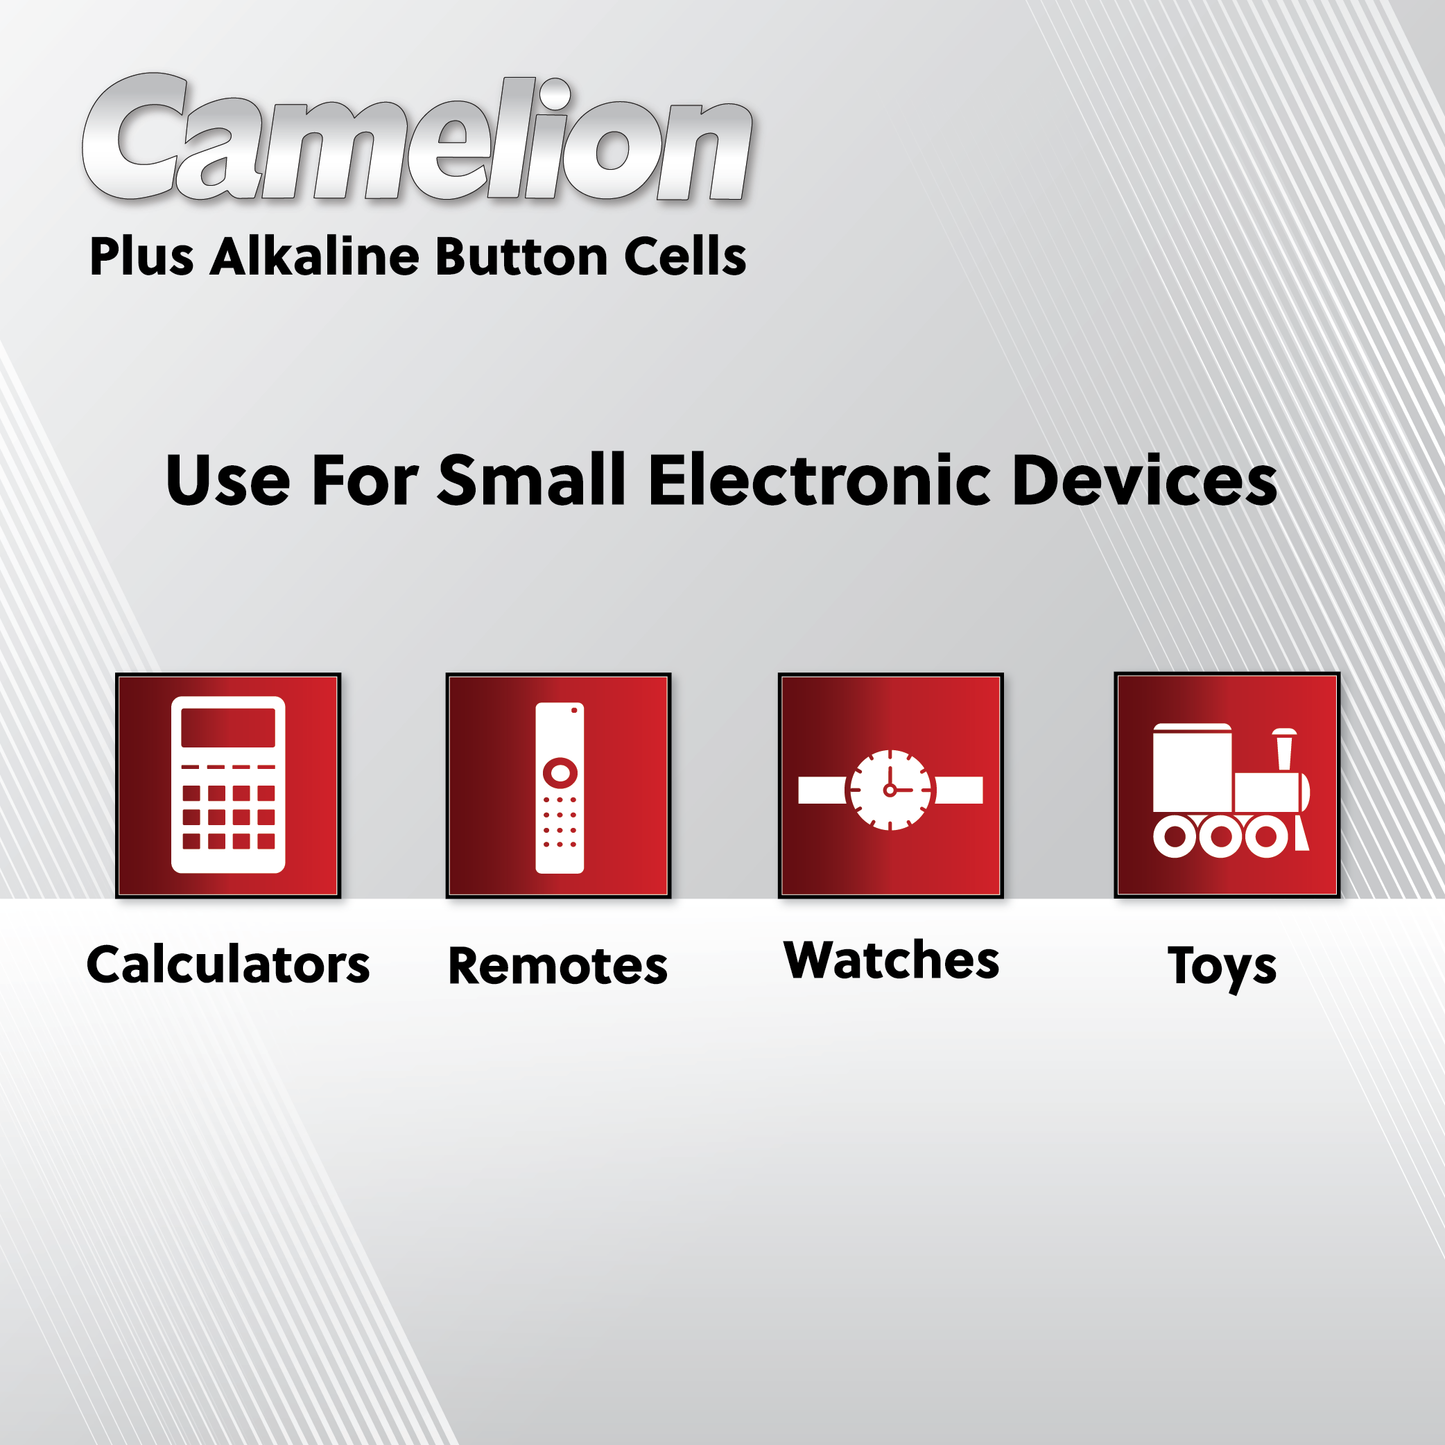 Camelion AG10 / 389 / LR1130 1.5V Button Cell Battery (Two